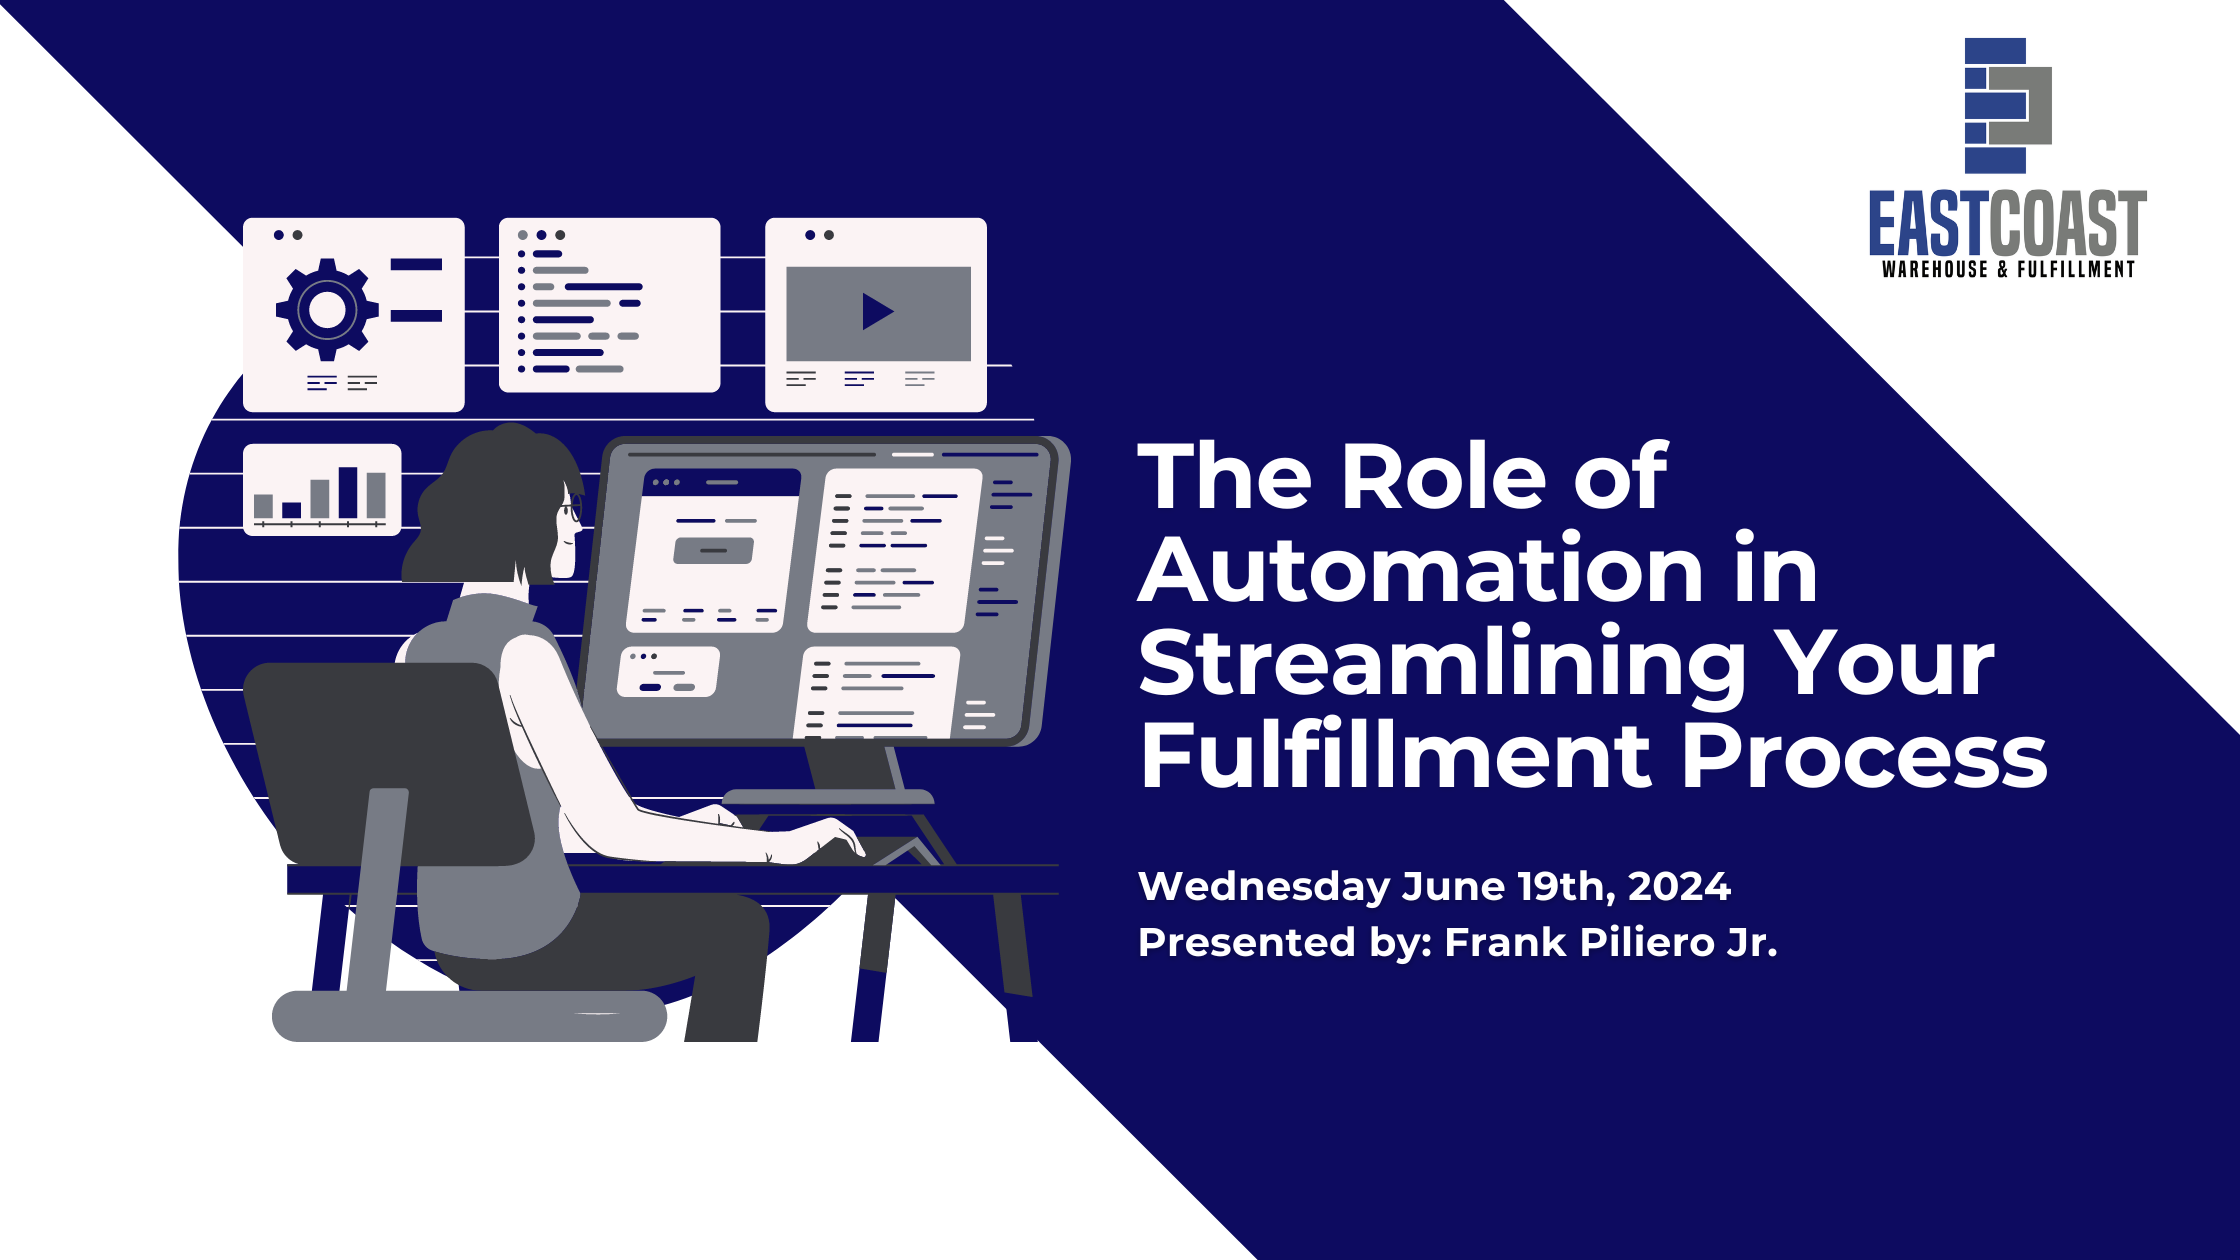 The Role of Automation in Streamlining Your Fulfillment Process By East Coast Warehouse & Fulfillment